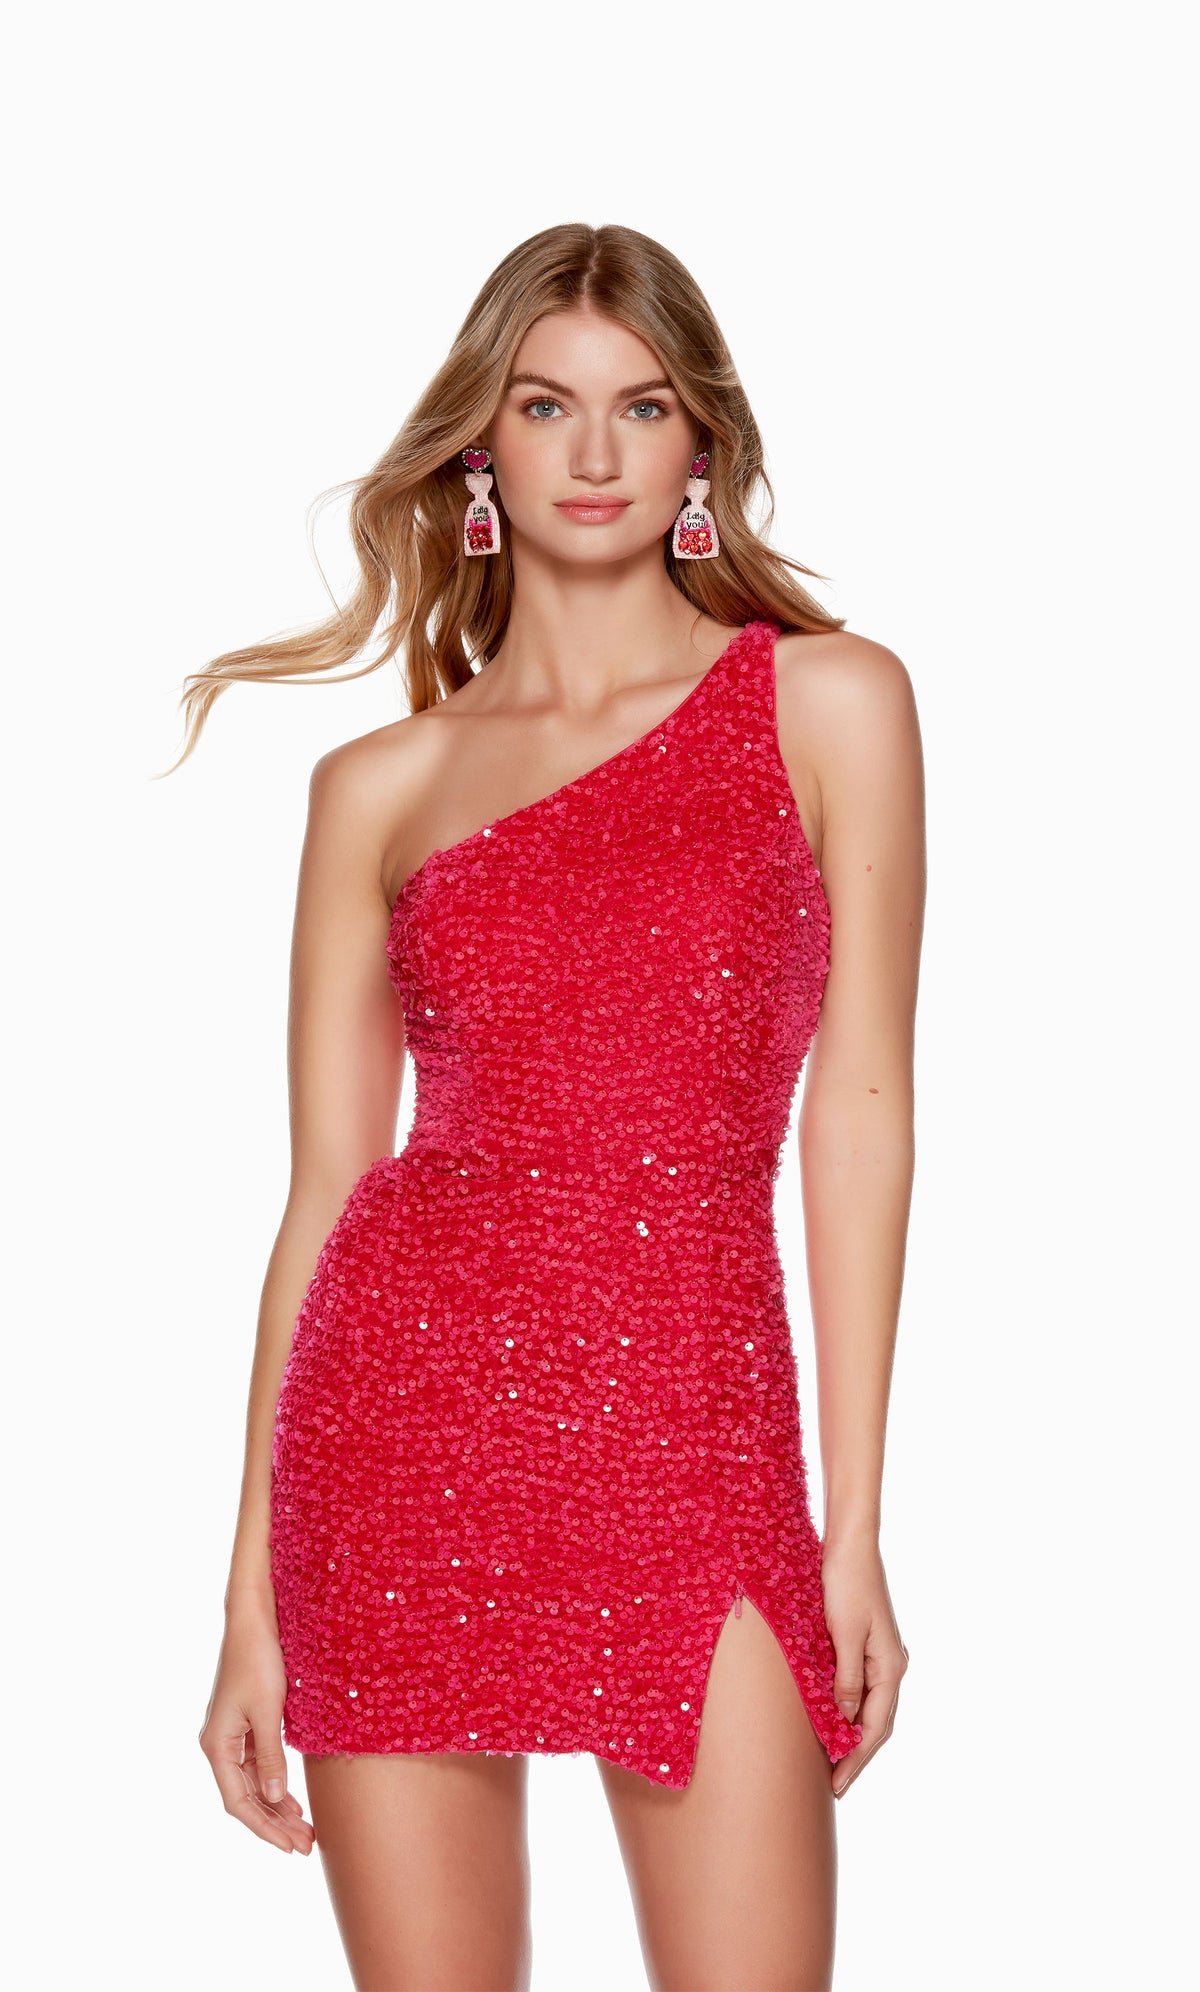 A stylish, one-shoulder short prom dress made from a fun iridescent fuchsia sequin fabric. The back of the dress has a lace-up style closure.